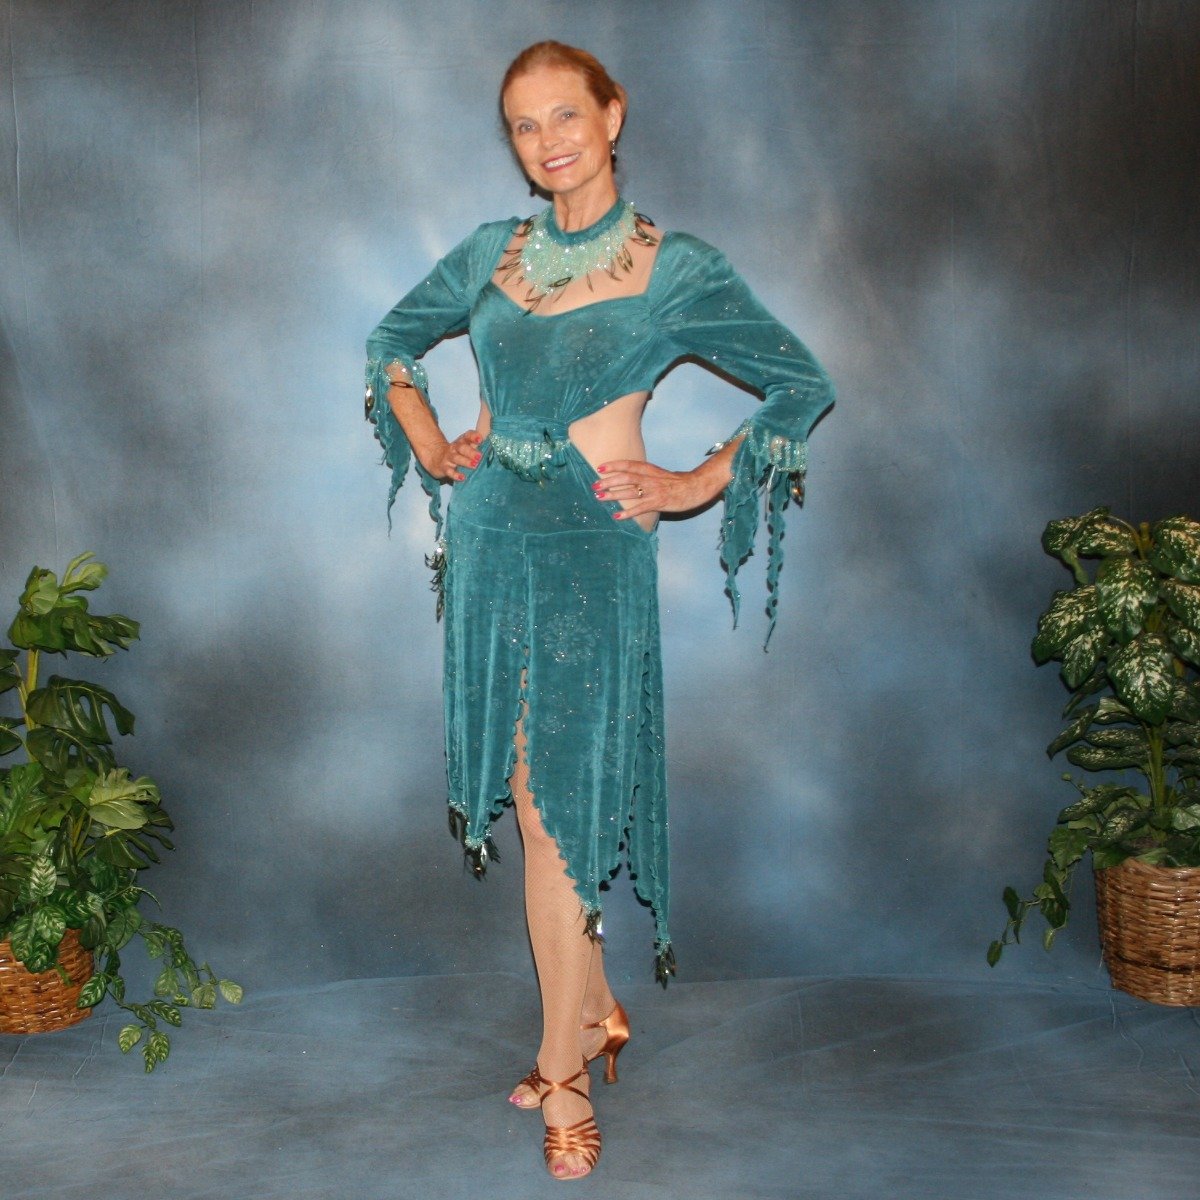 Crystal's Creations Teal Latin/rhythm dress was created in teal glitter slinky with a subtle gold glitter floral print, embellished with light teal faceted round lucite beading & teal spangles, includes a matching neckpiece.